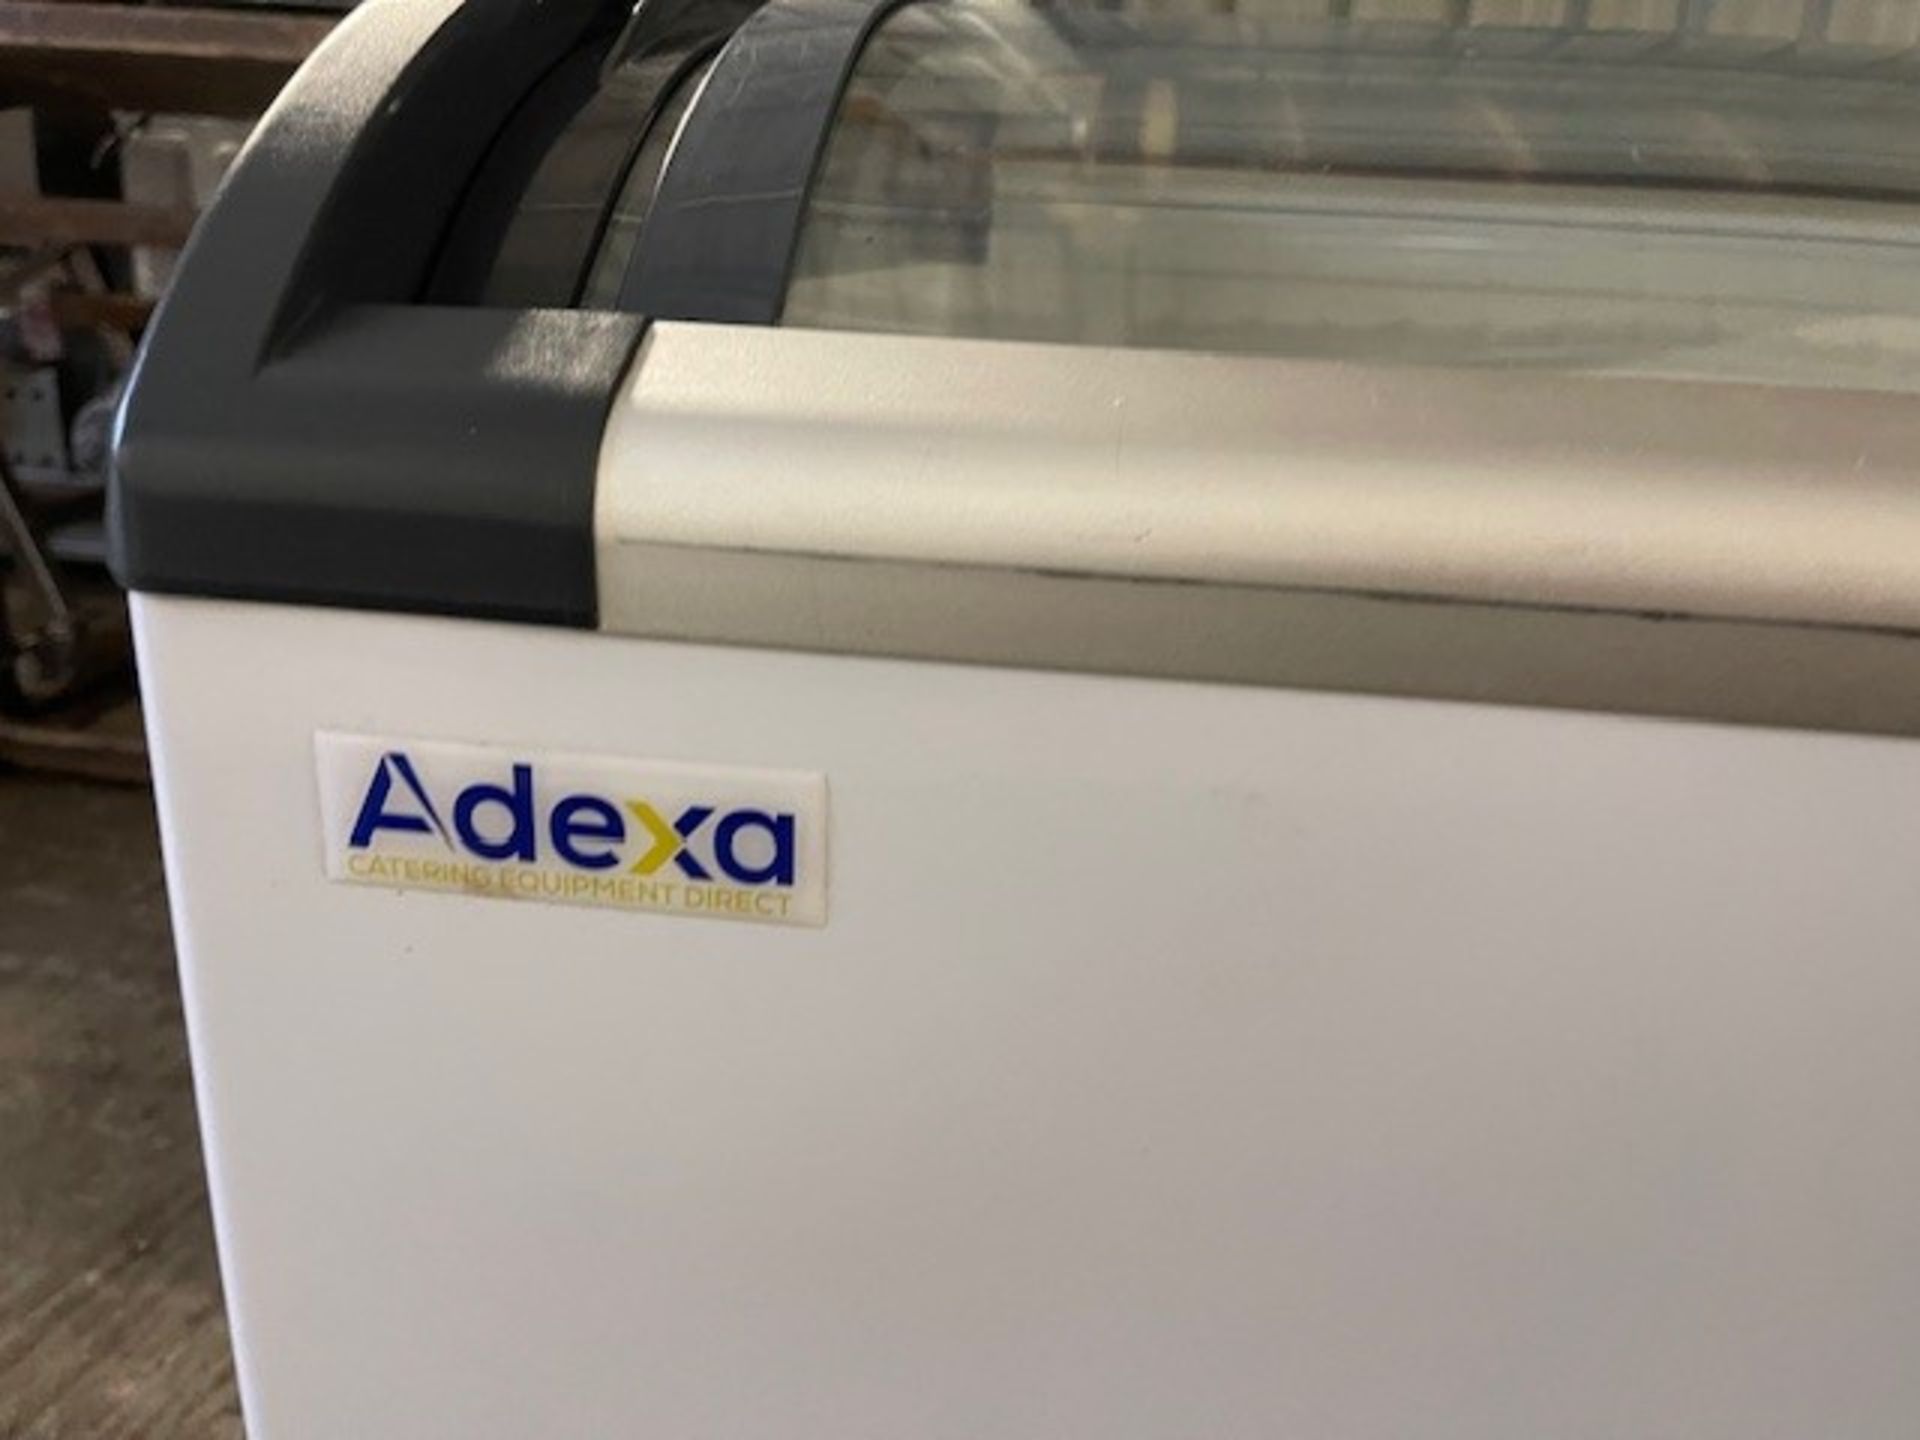 ADEXA SD-520Q CHEST FREEZER *** NOTE ASSET(S) LOCATED IN CROYDON - WILL REQUIRE REMOVAL BY FRIDAY - Image 8 of 9